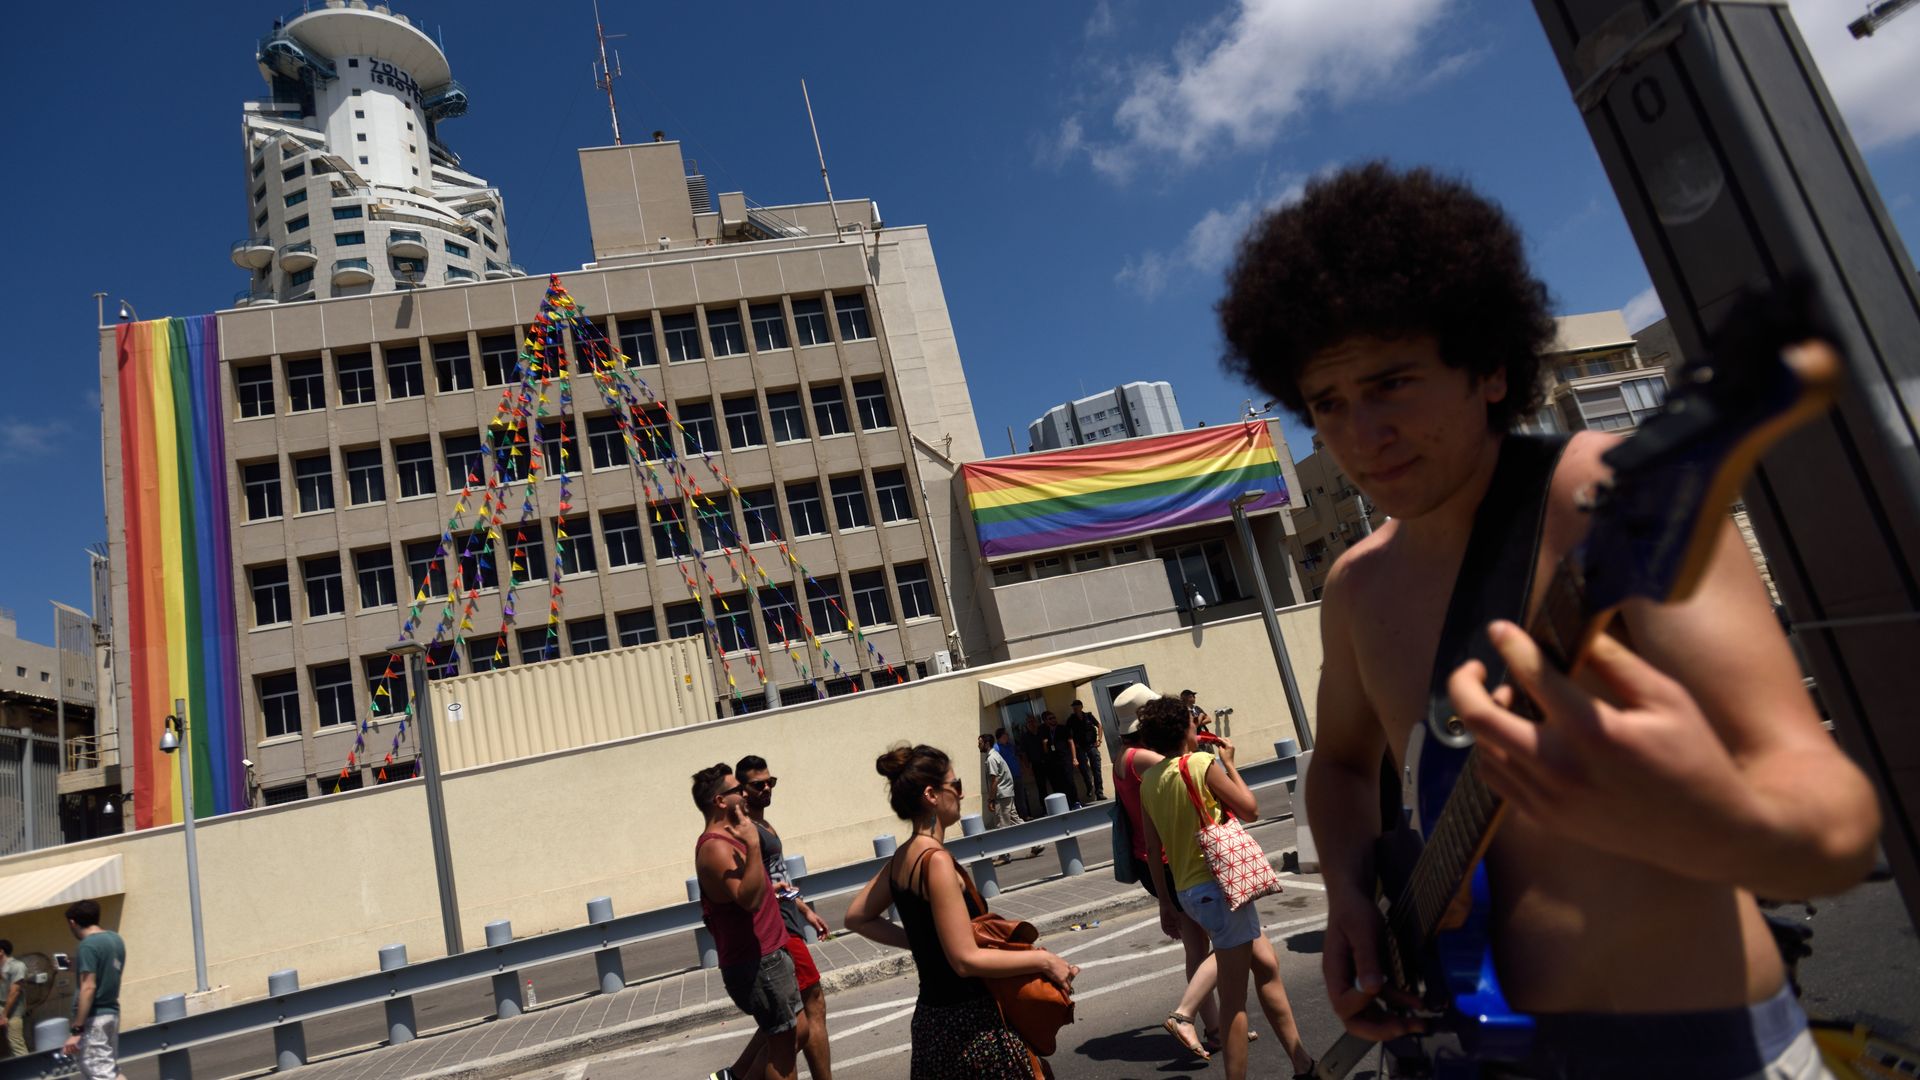 A person playing guitar in front of the American Emabssy in Tel-Aviv decorated with rainbow flags during a pride parade in 2015.